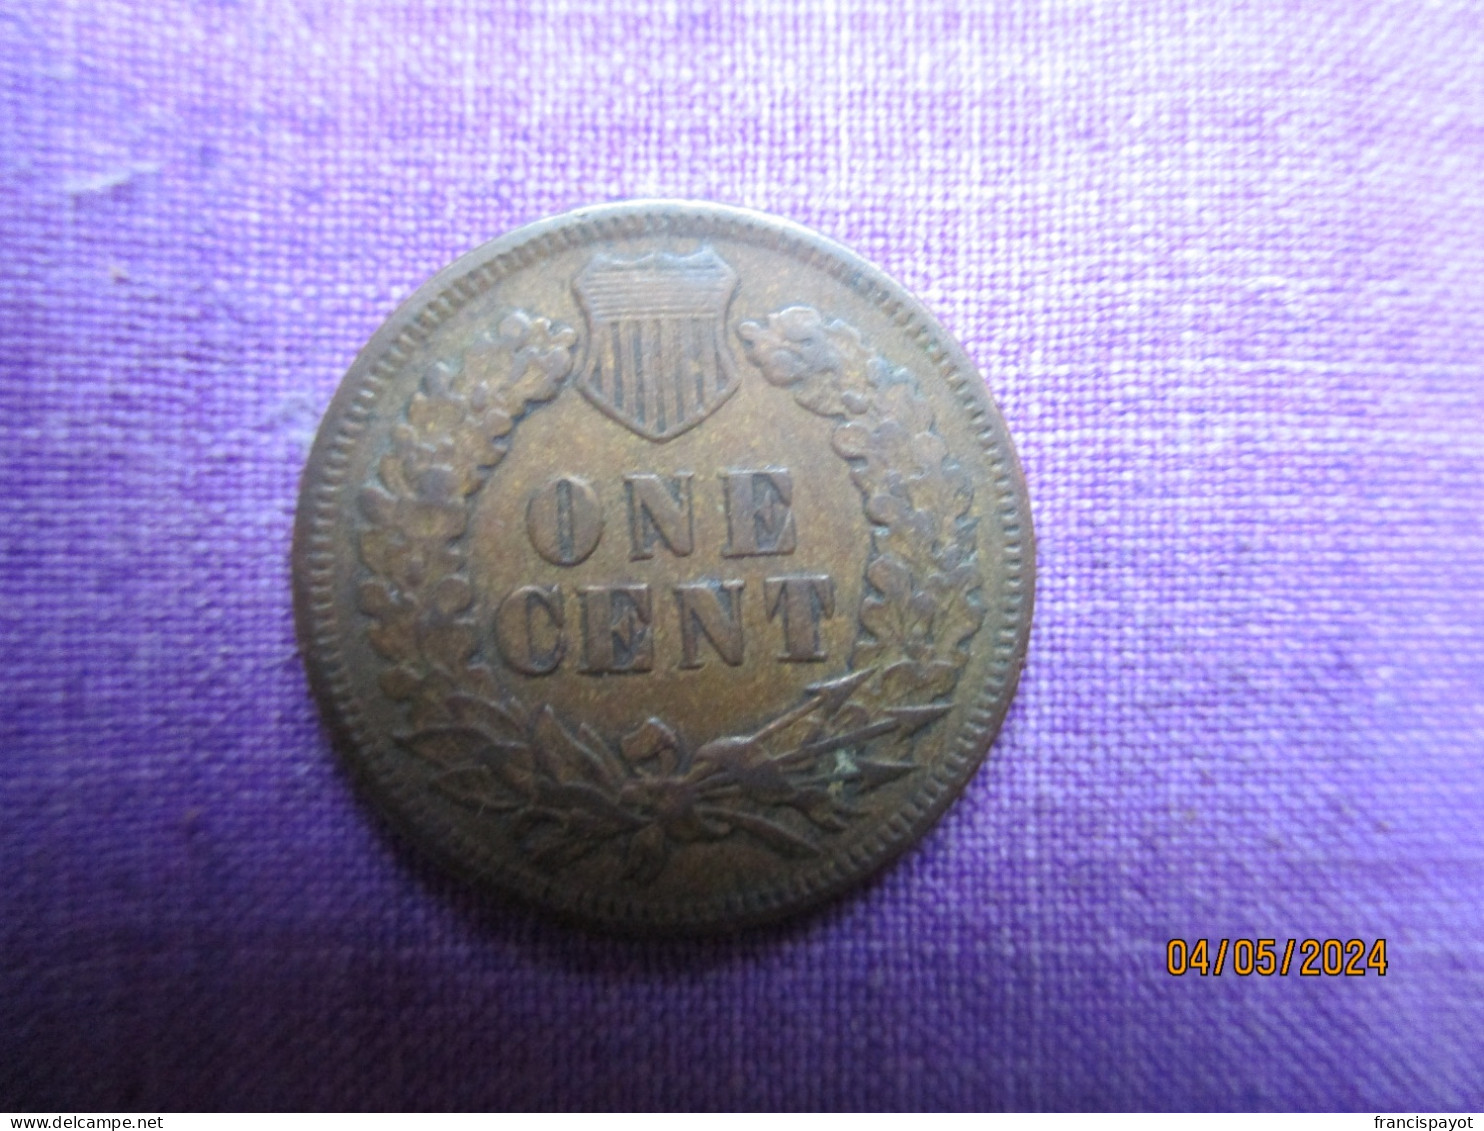 USA: One Cent Indian Head 1895 - 1859-1909: Indian Head